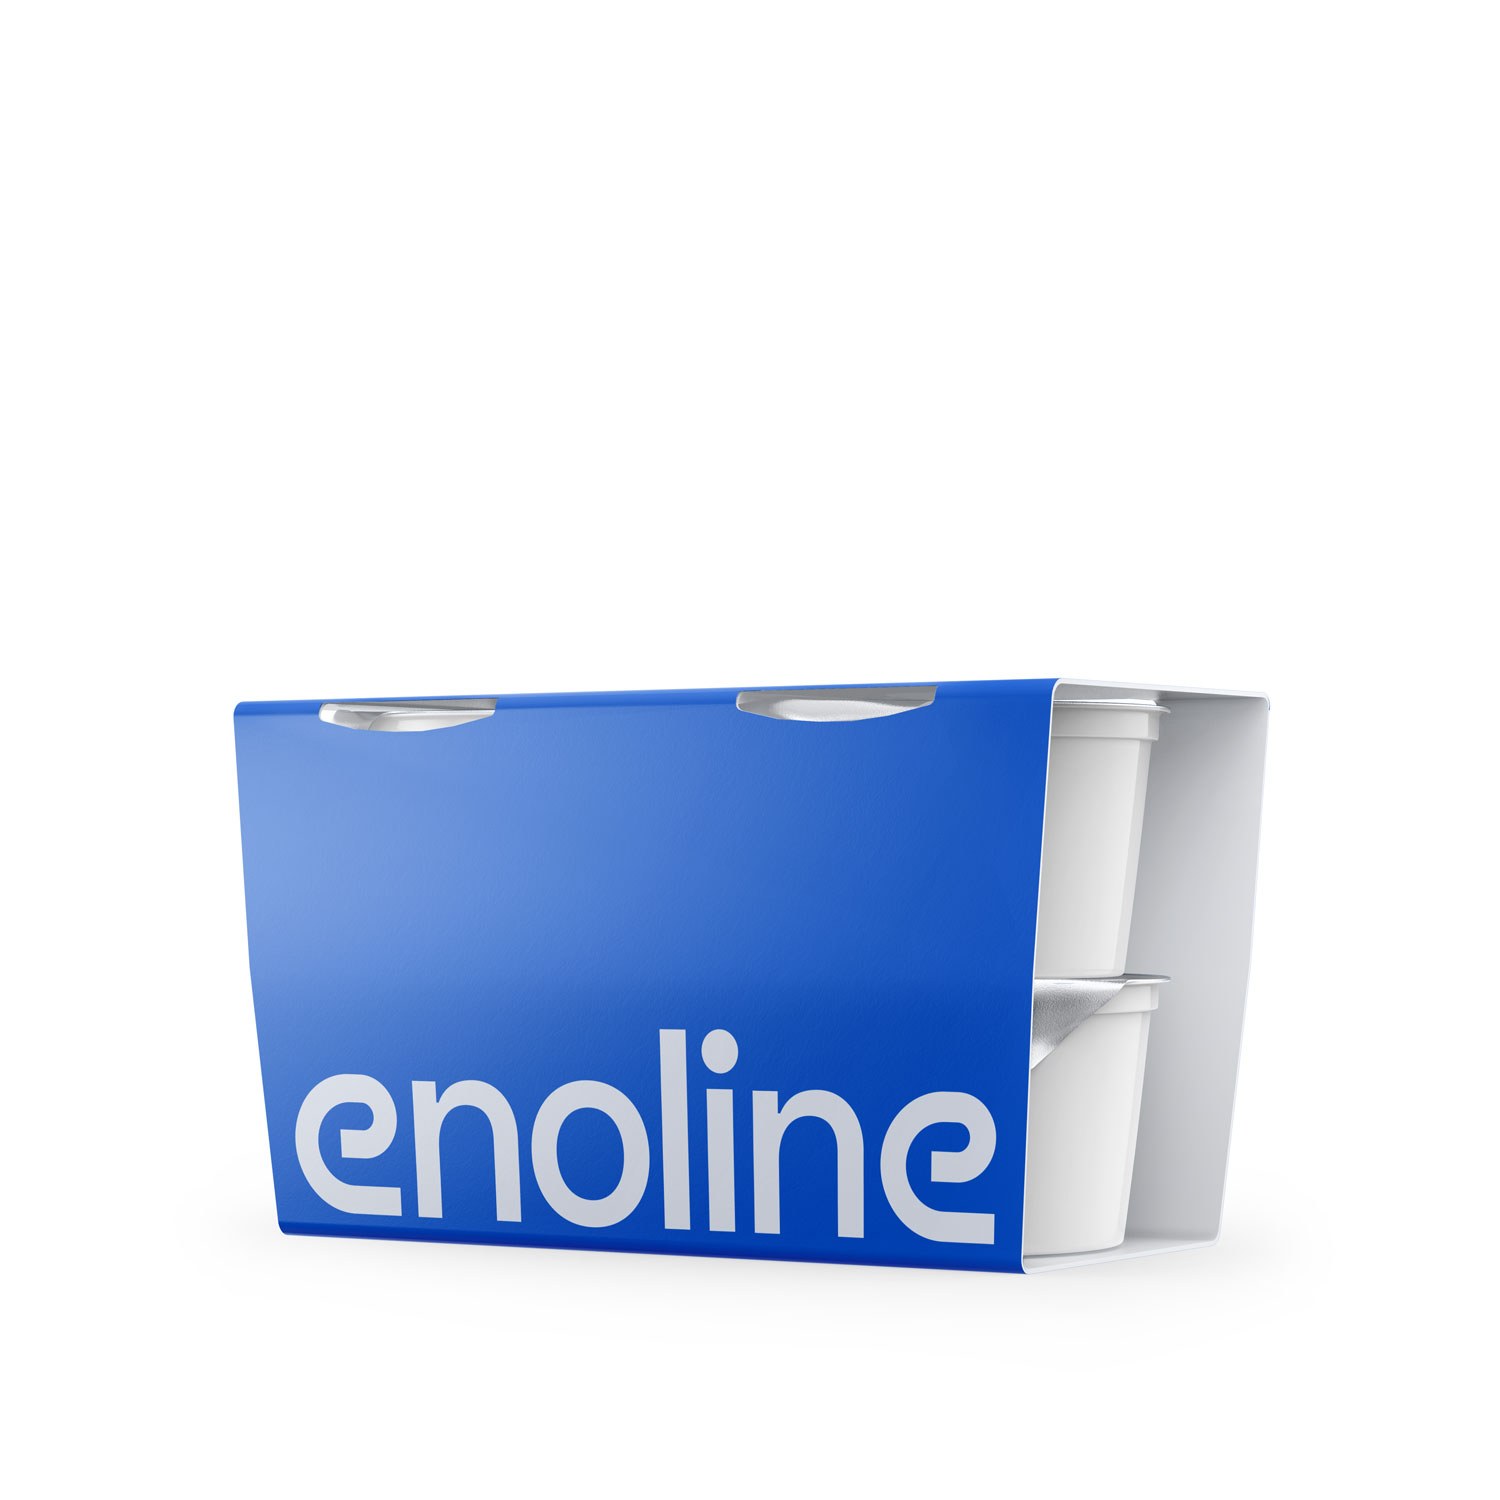 Enoline packaging solution wrap around case packing cardboard